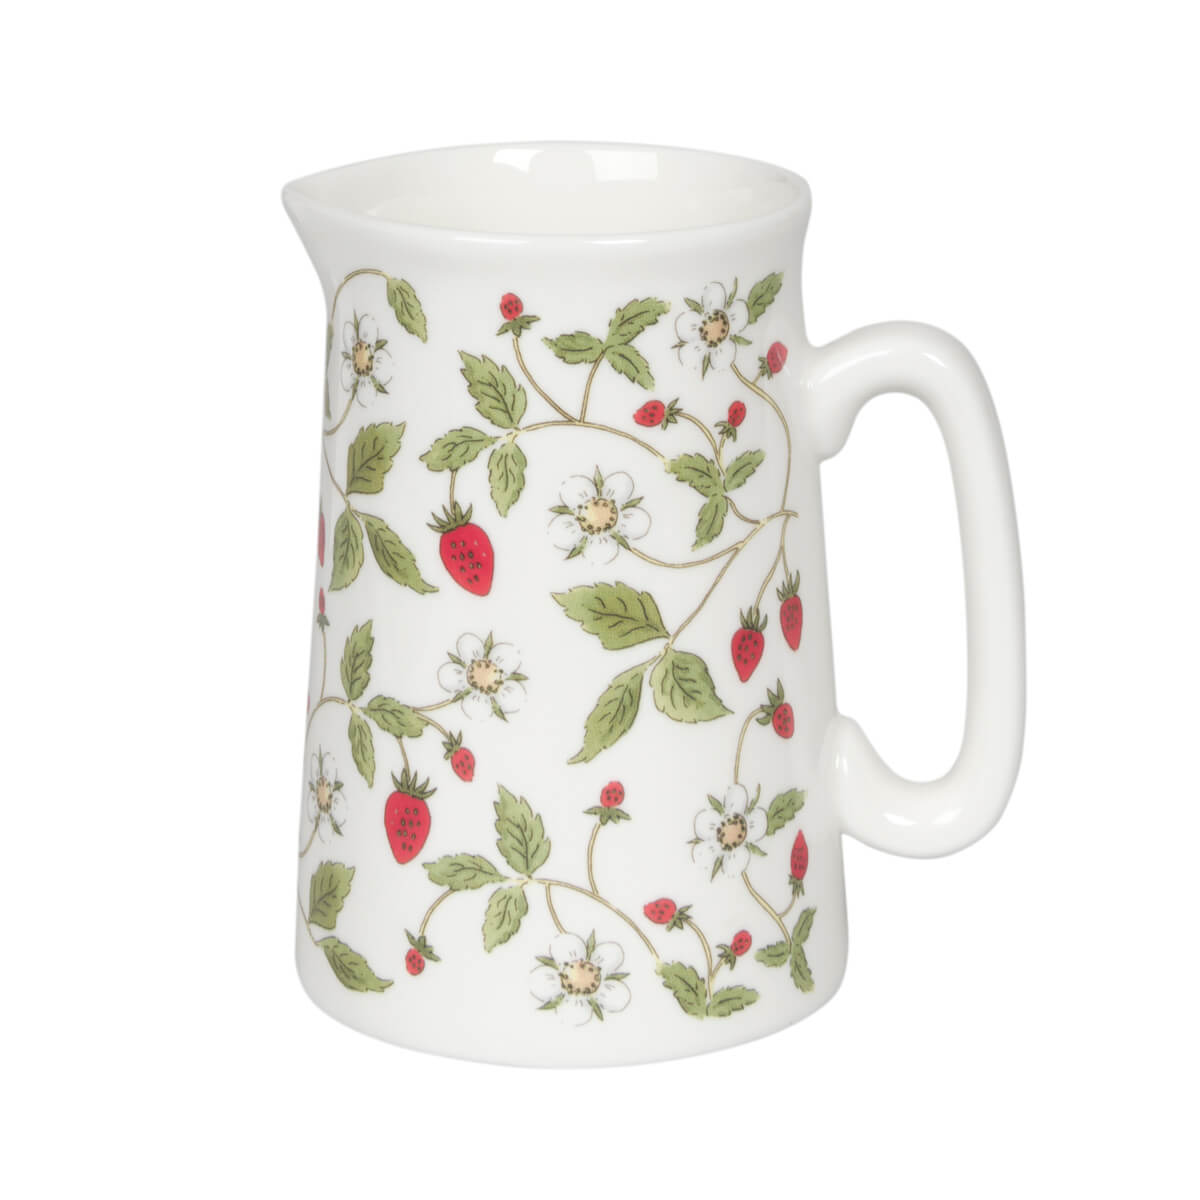 Strawberries Jug - Small by Sophie Allport